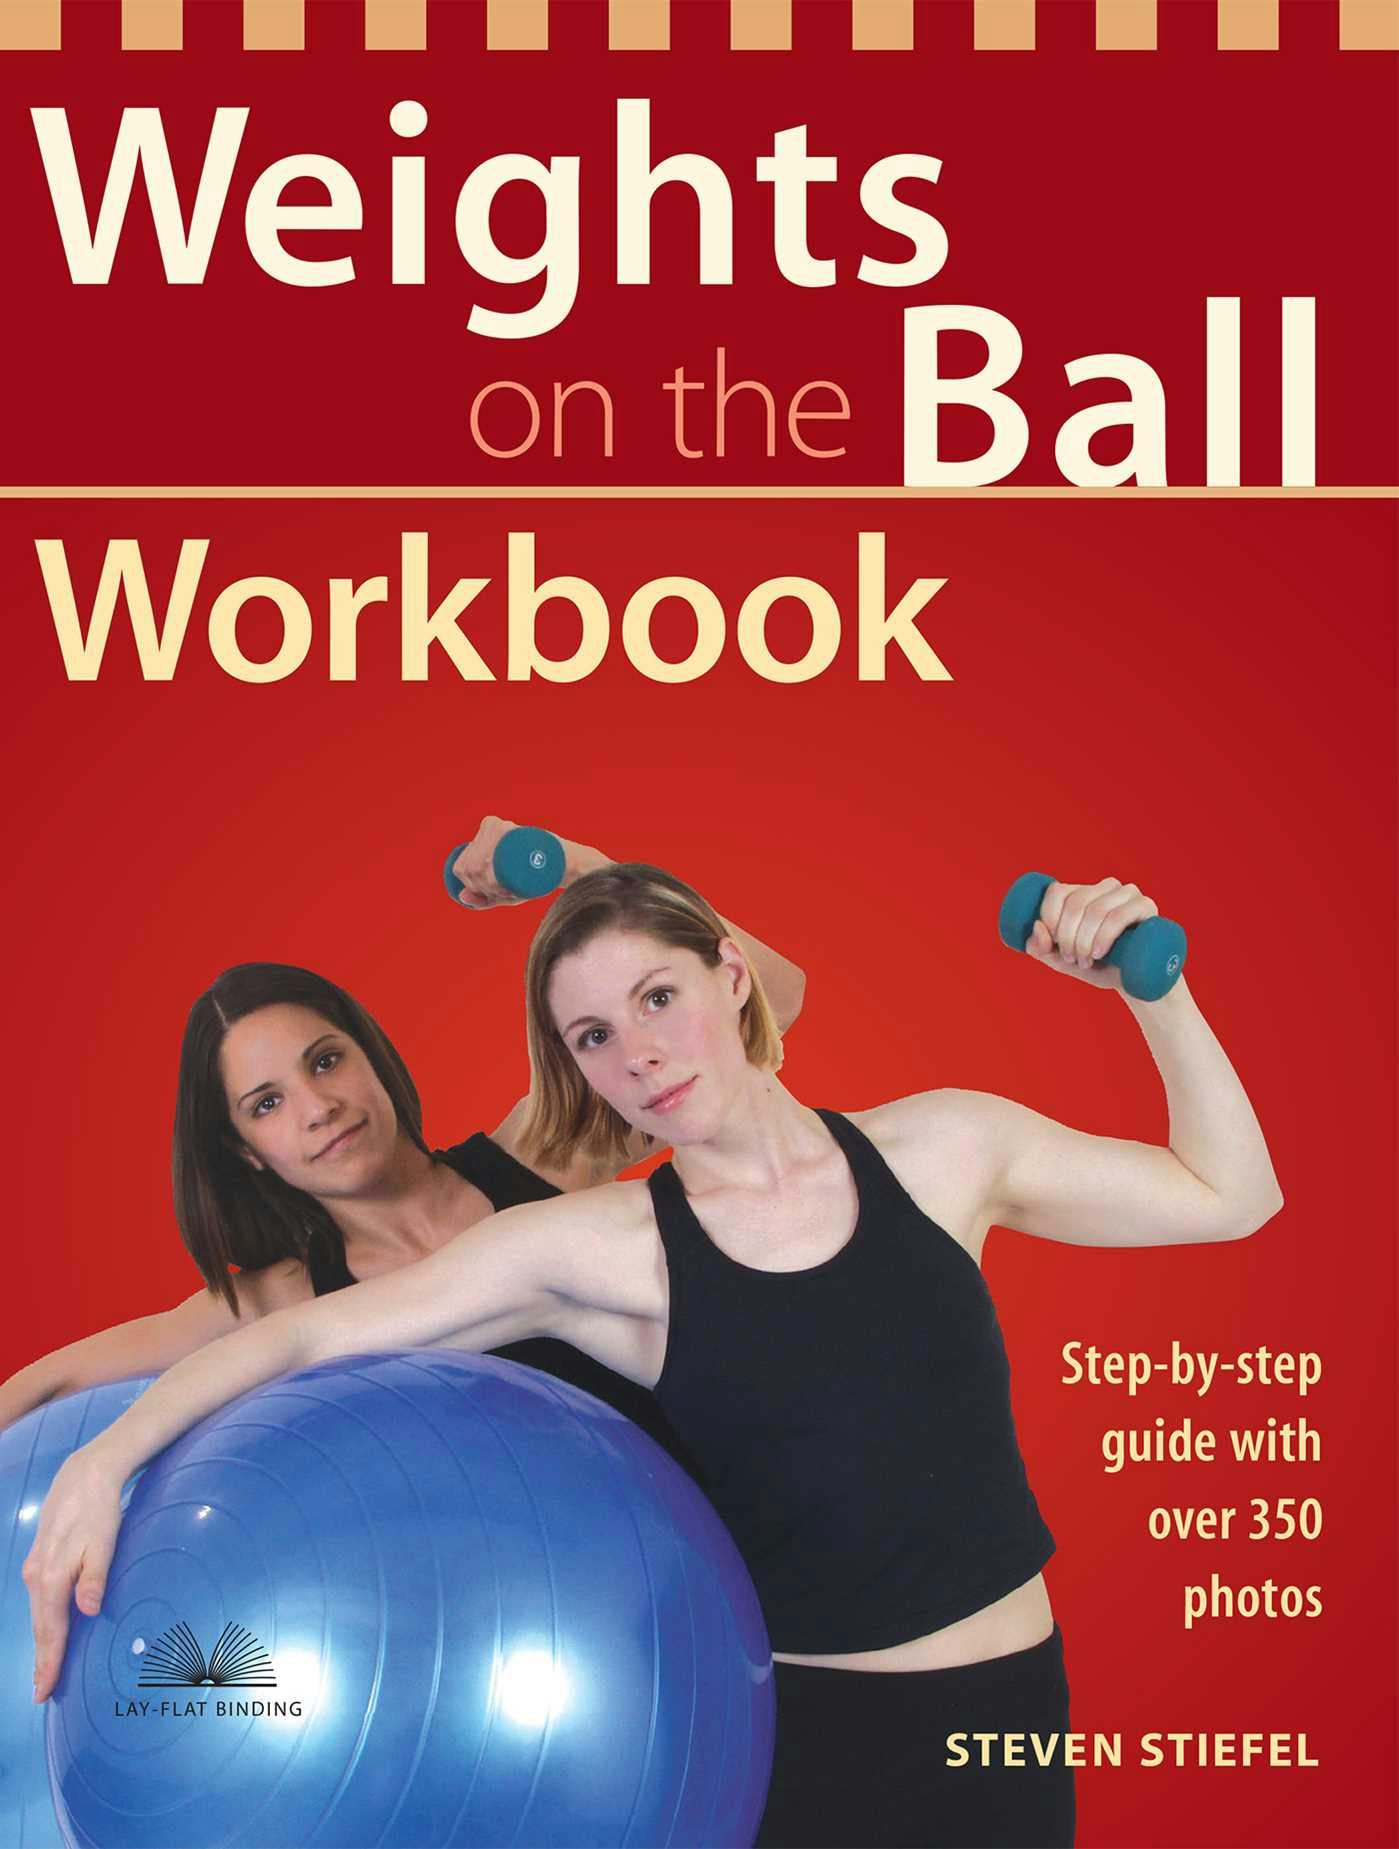 Weights on the Ball Workbook: Step-by-Step Guide with Over 350 Photos - undefined